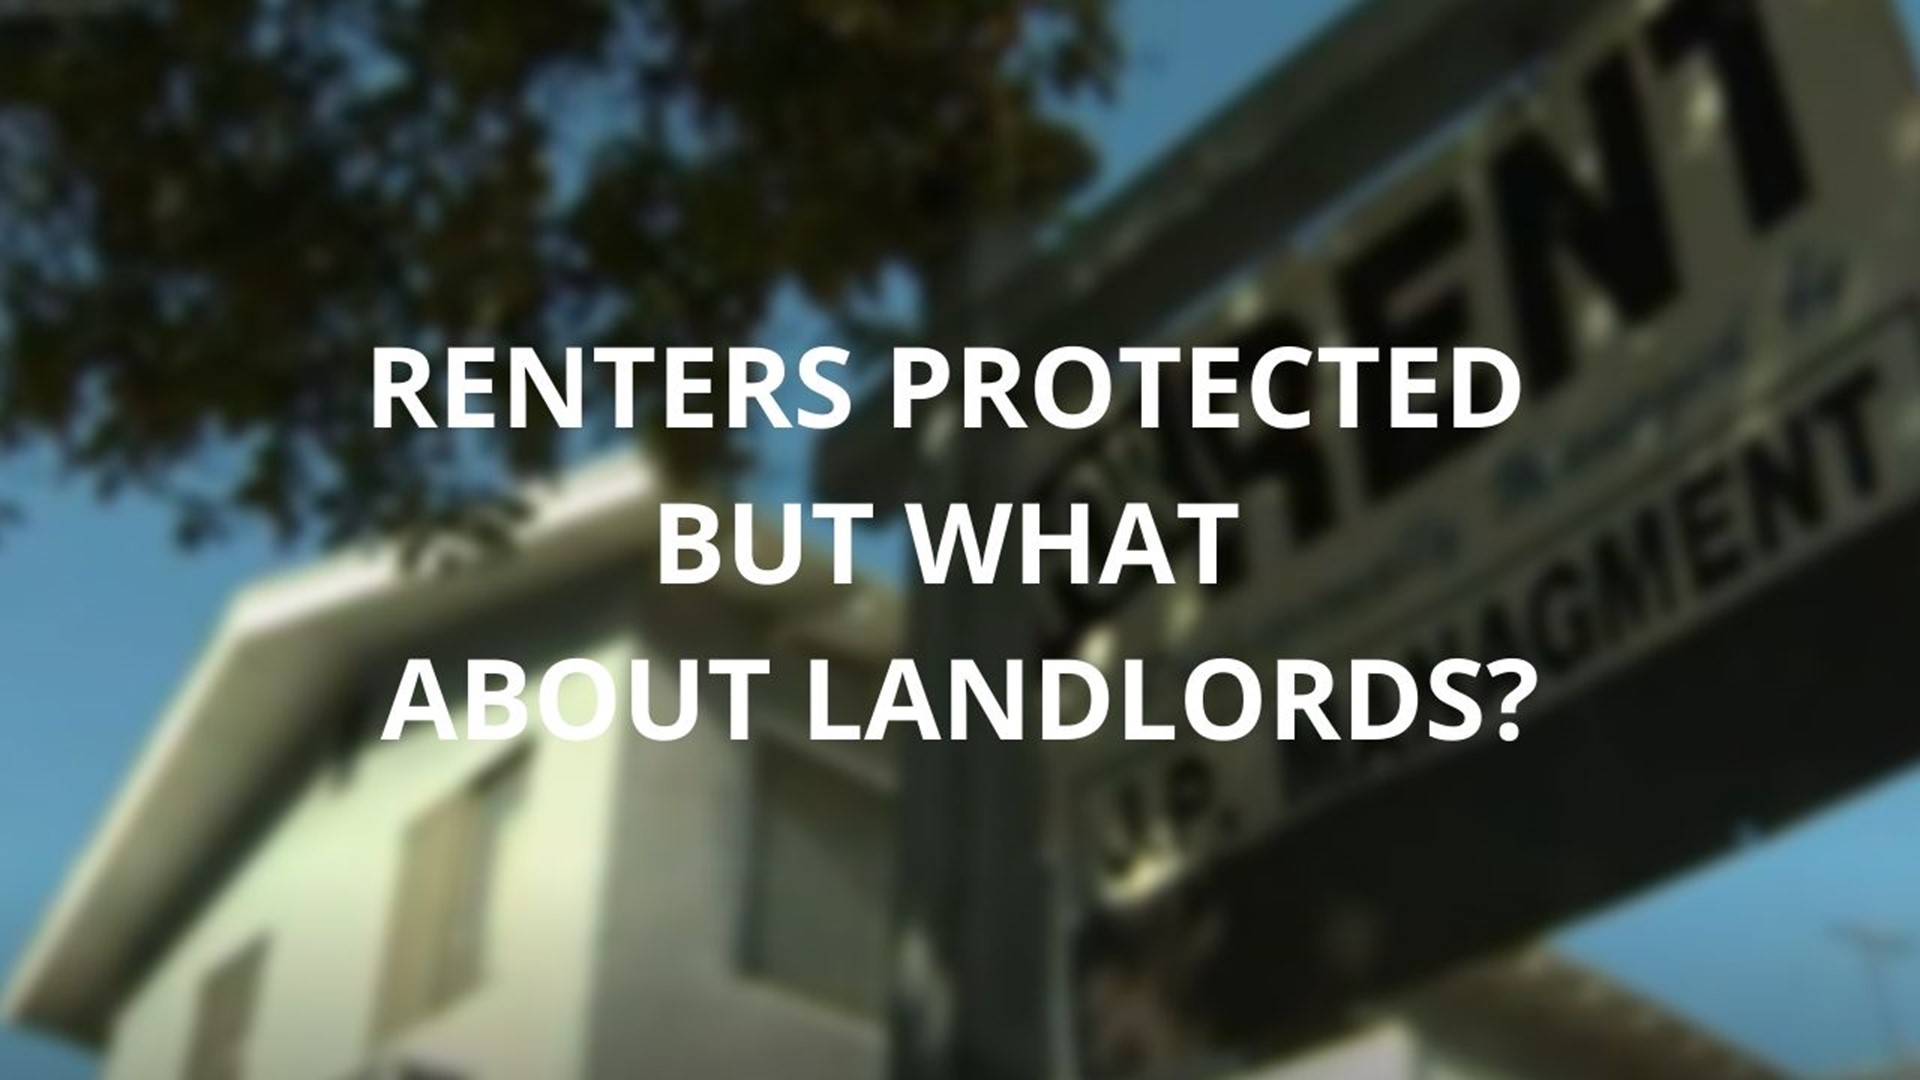 Renters are protected during the coronavirus pandemic. But what about landlords?